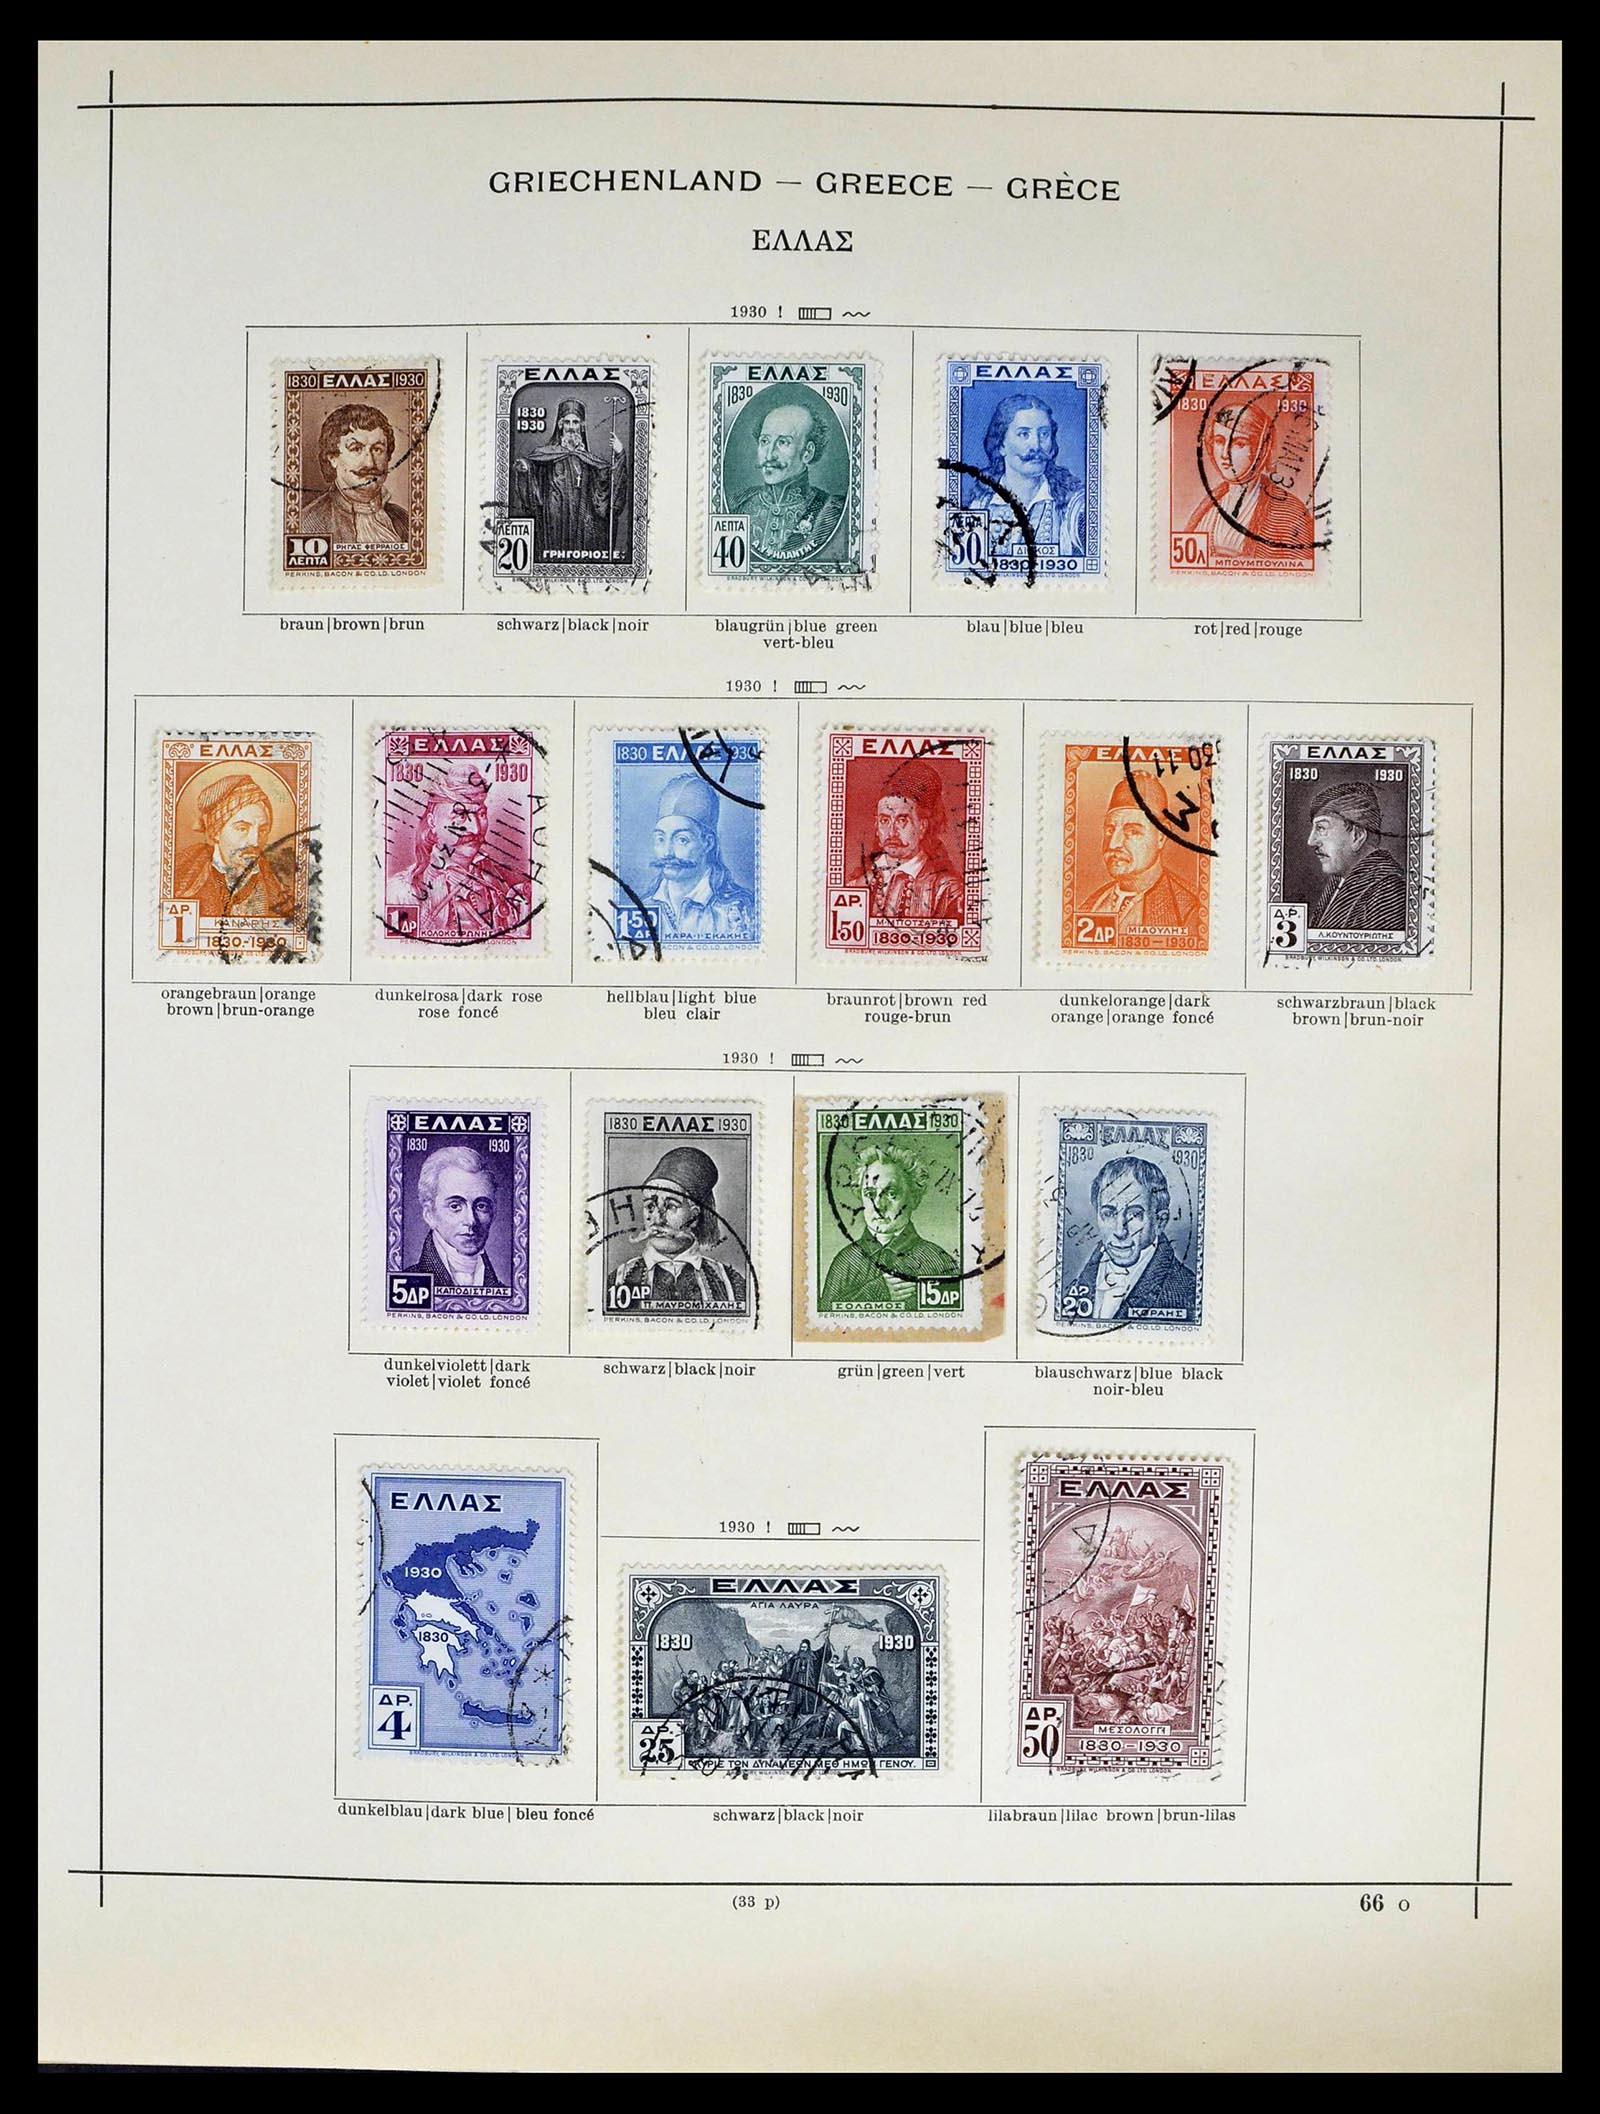 39156 0021 - Stamp collection 39156 Greece 1861-1996.